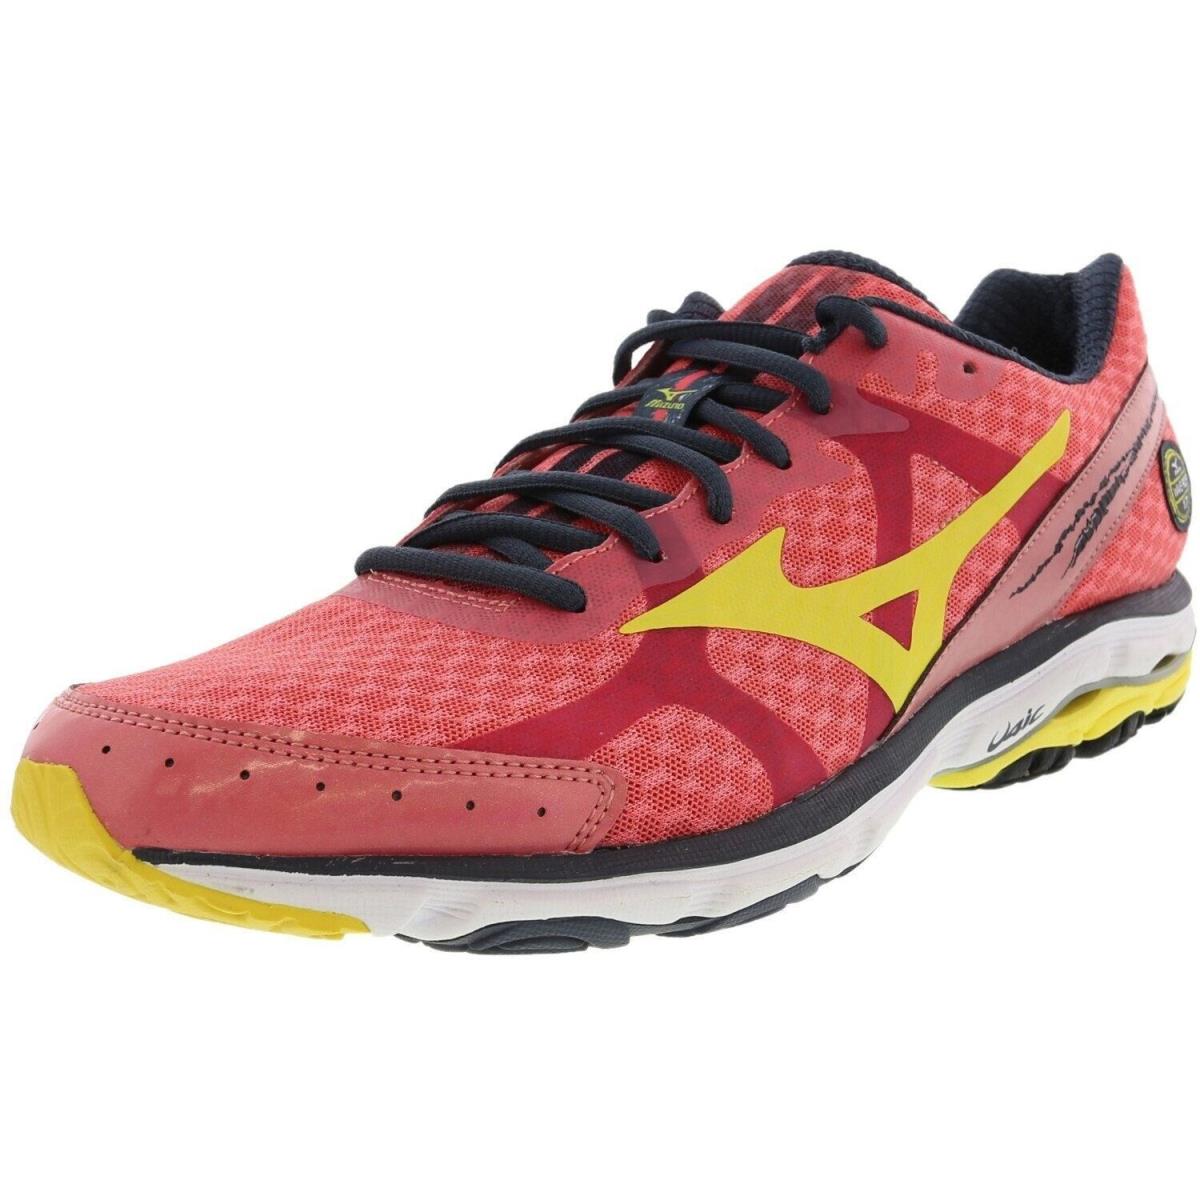 Mizuno Womens Wave Rider 17 Mesh Lace up Running Shoes Pink 9